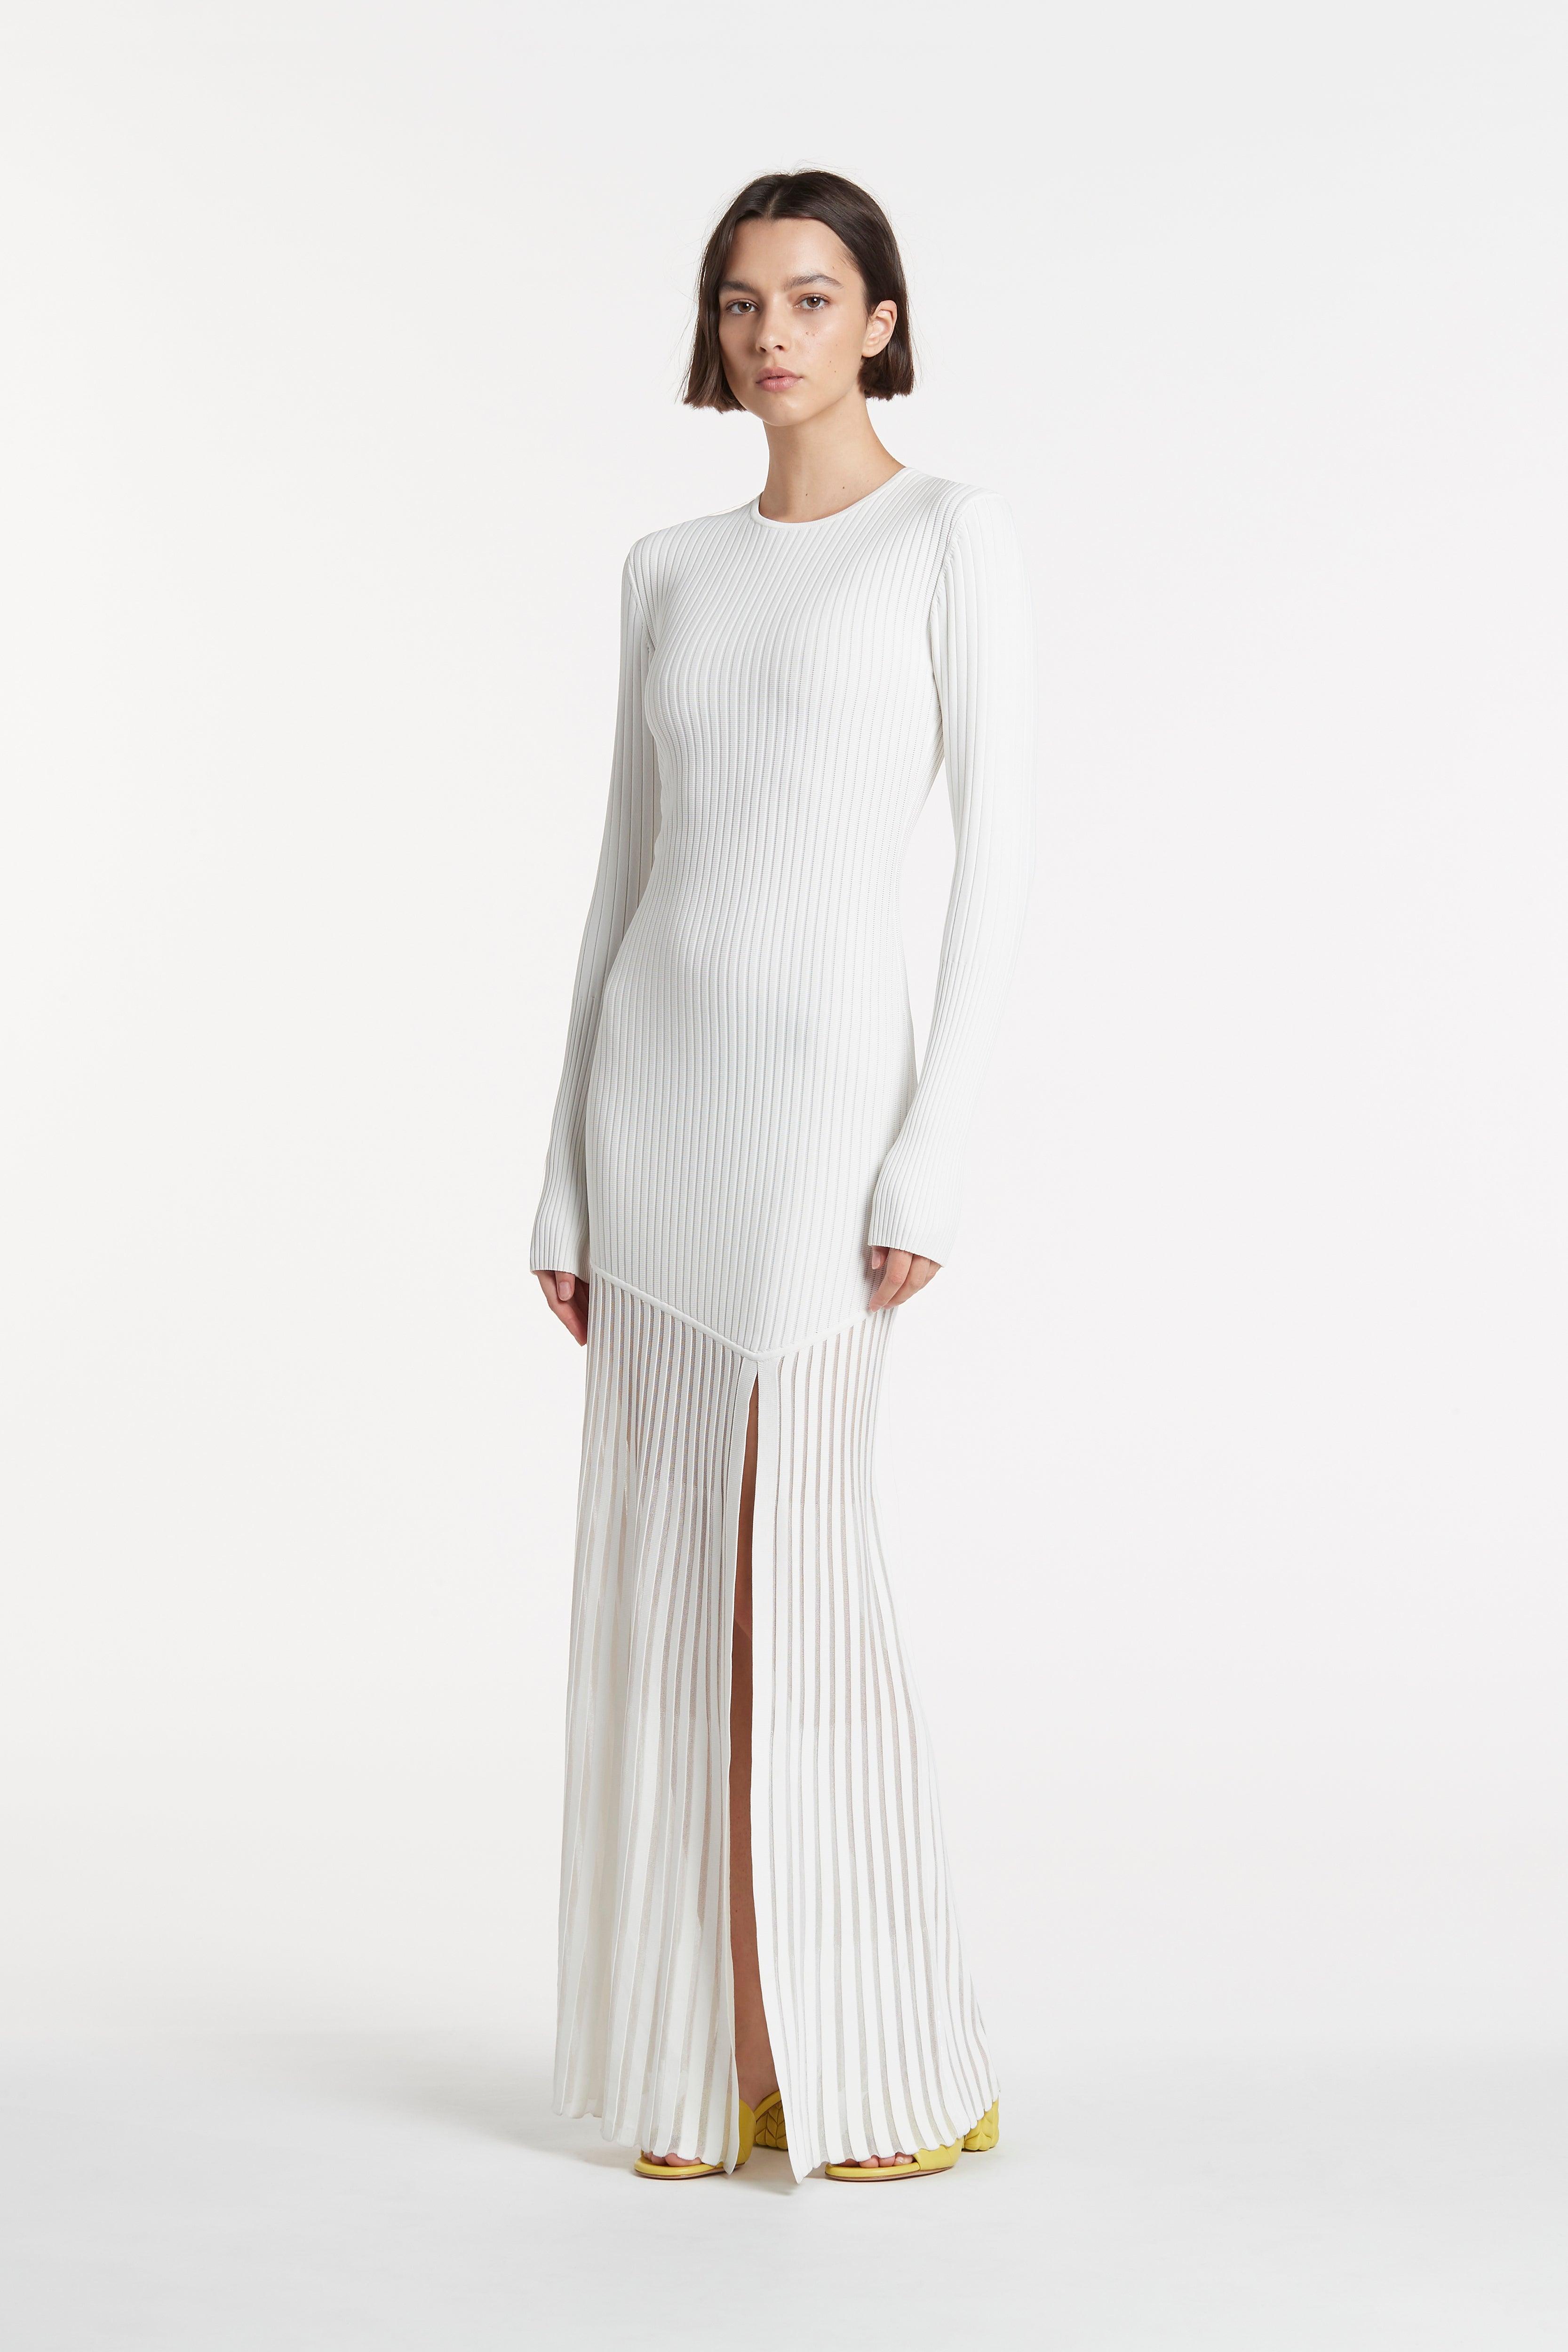 Sylvie Long Sleeve Dress - The Iconic Issue